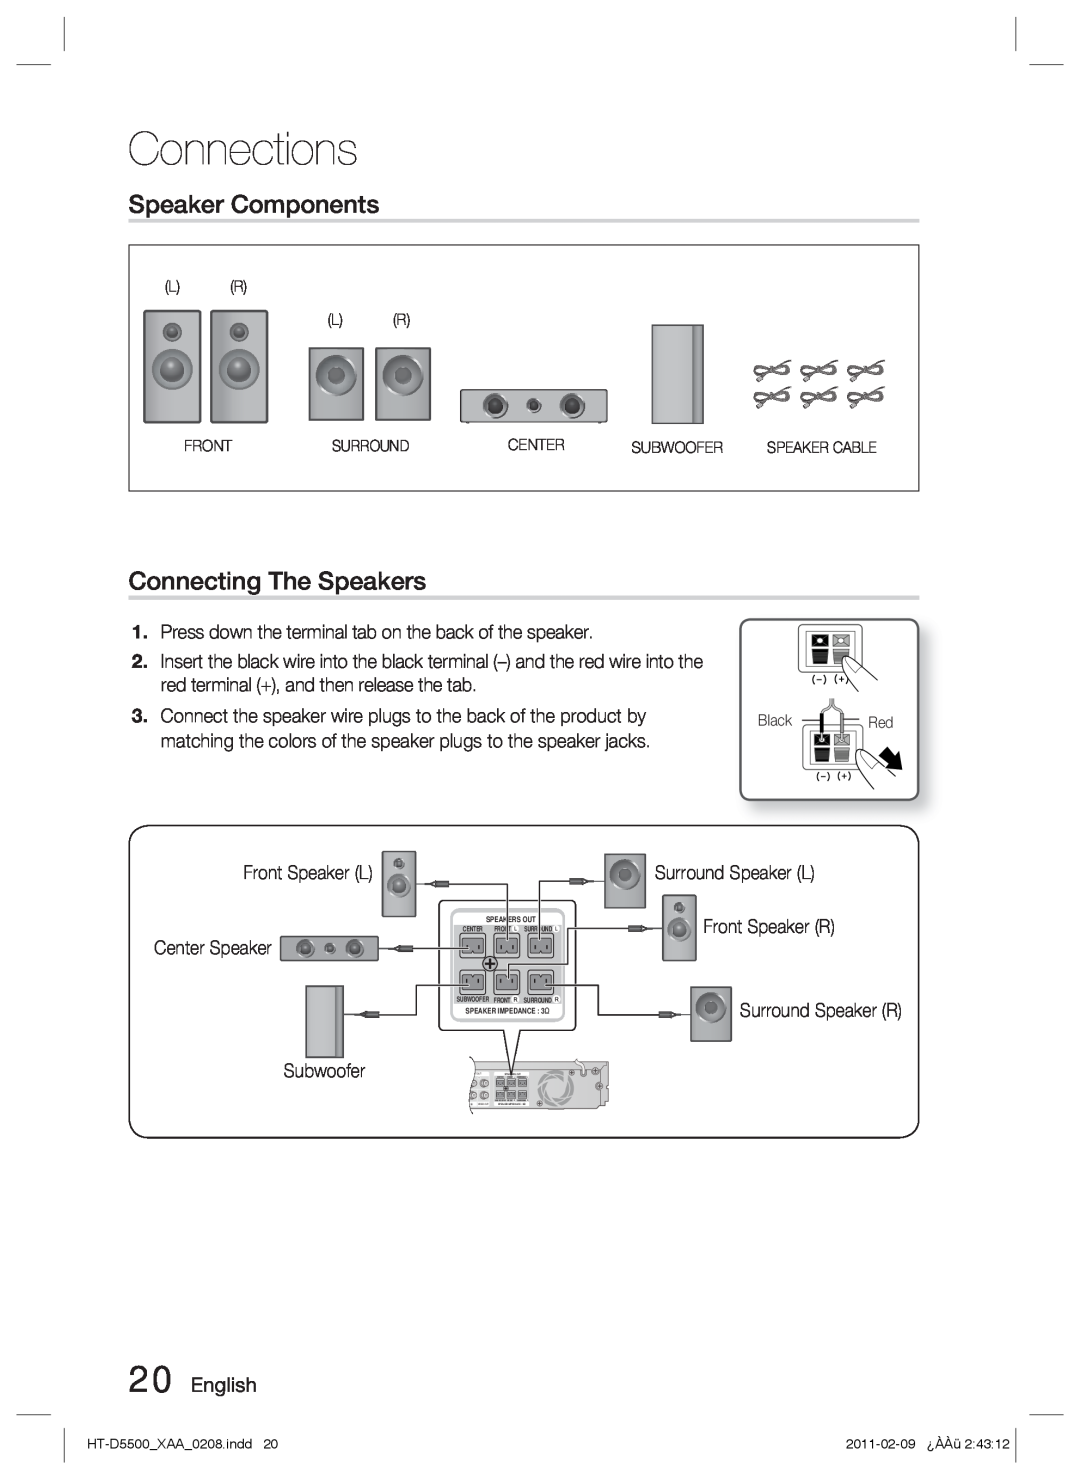 Samsung D5500 user manual Speaker Components, Connecting The Speakers, Connections, English 